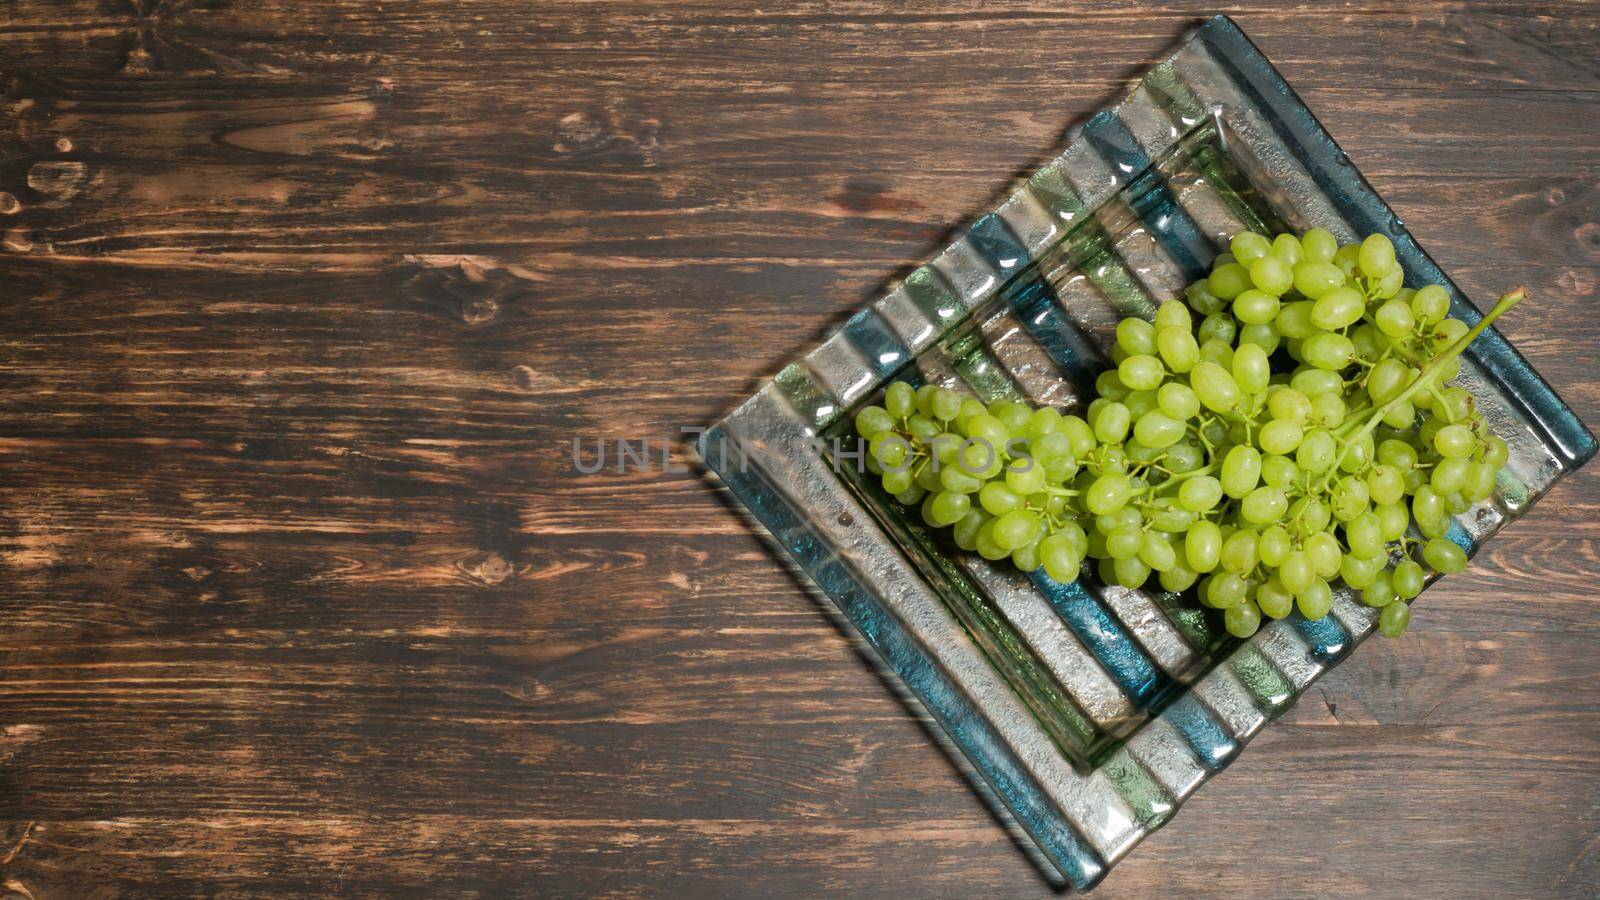 The bunch of grapes lies on a plate, the berries disappear, an empty plate remains, time lapse